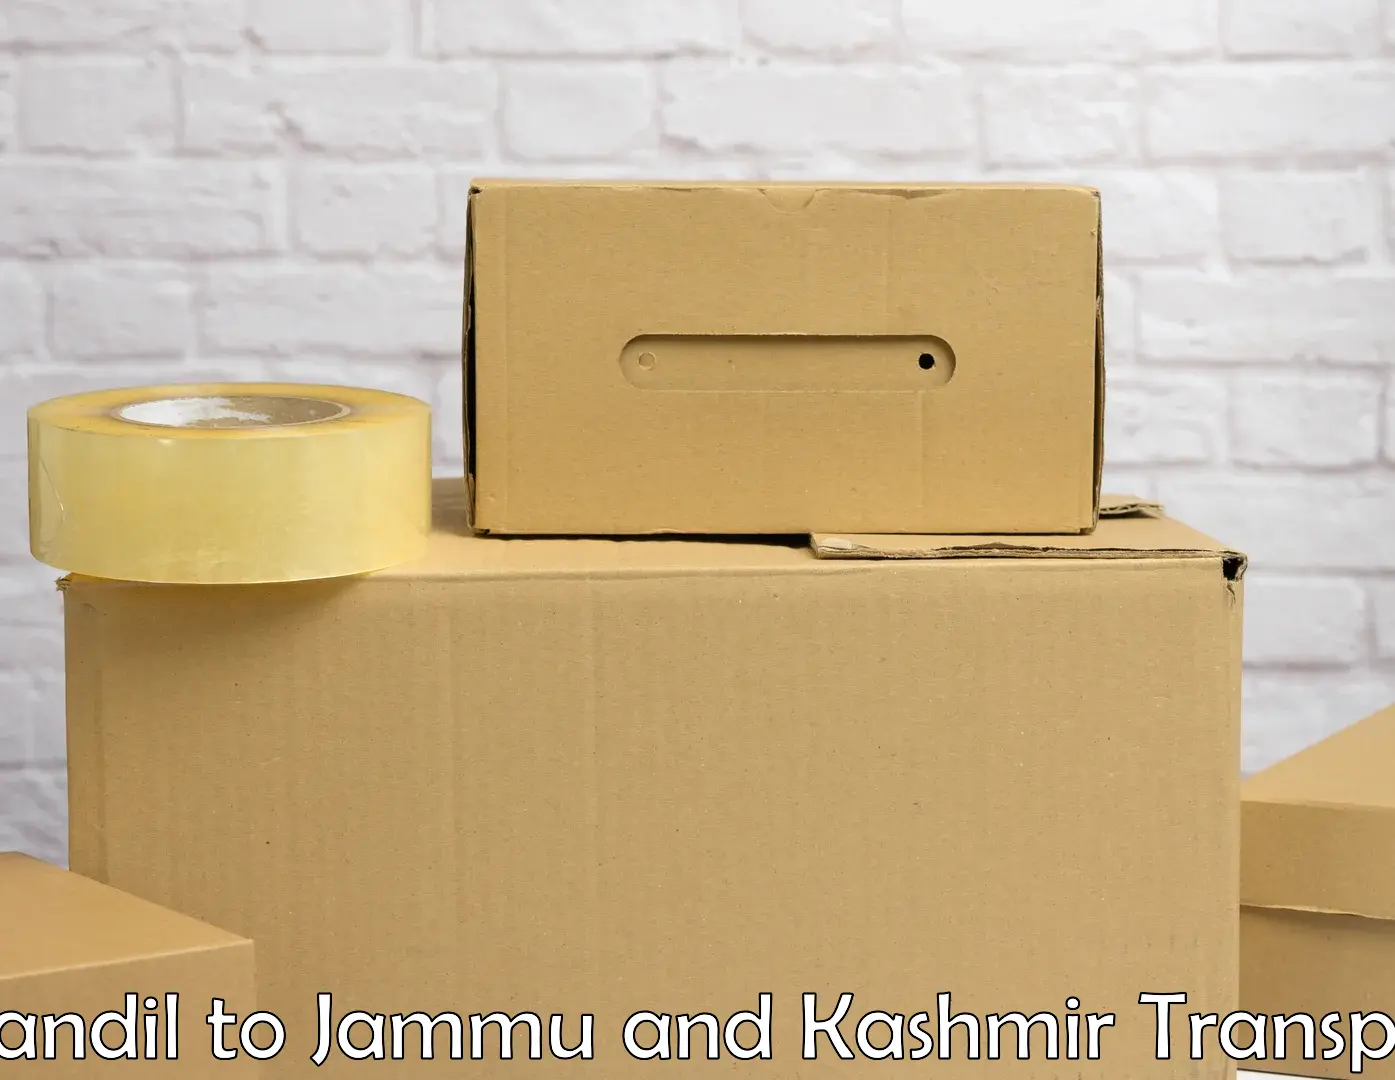 Delivery service Chandil to Rajouri